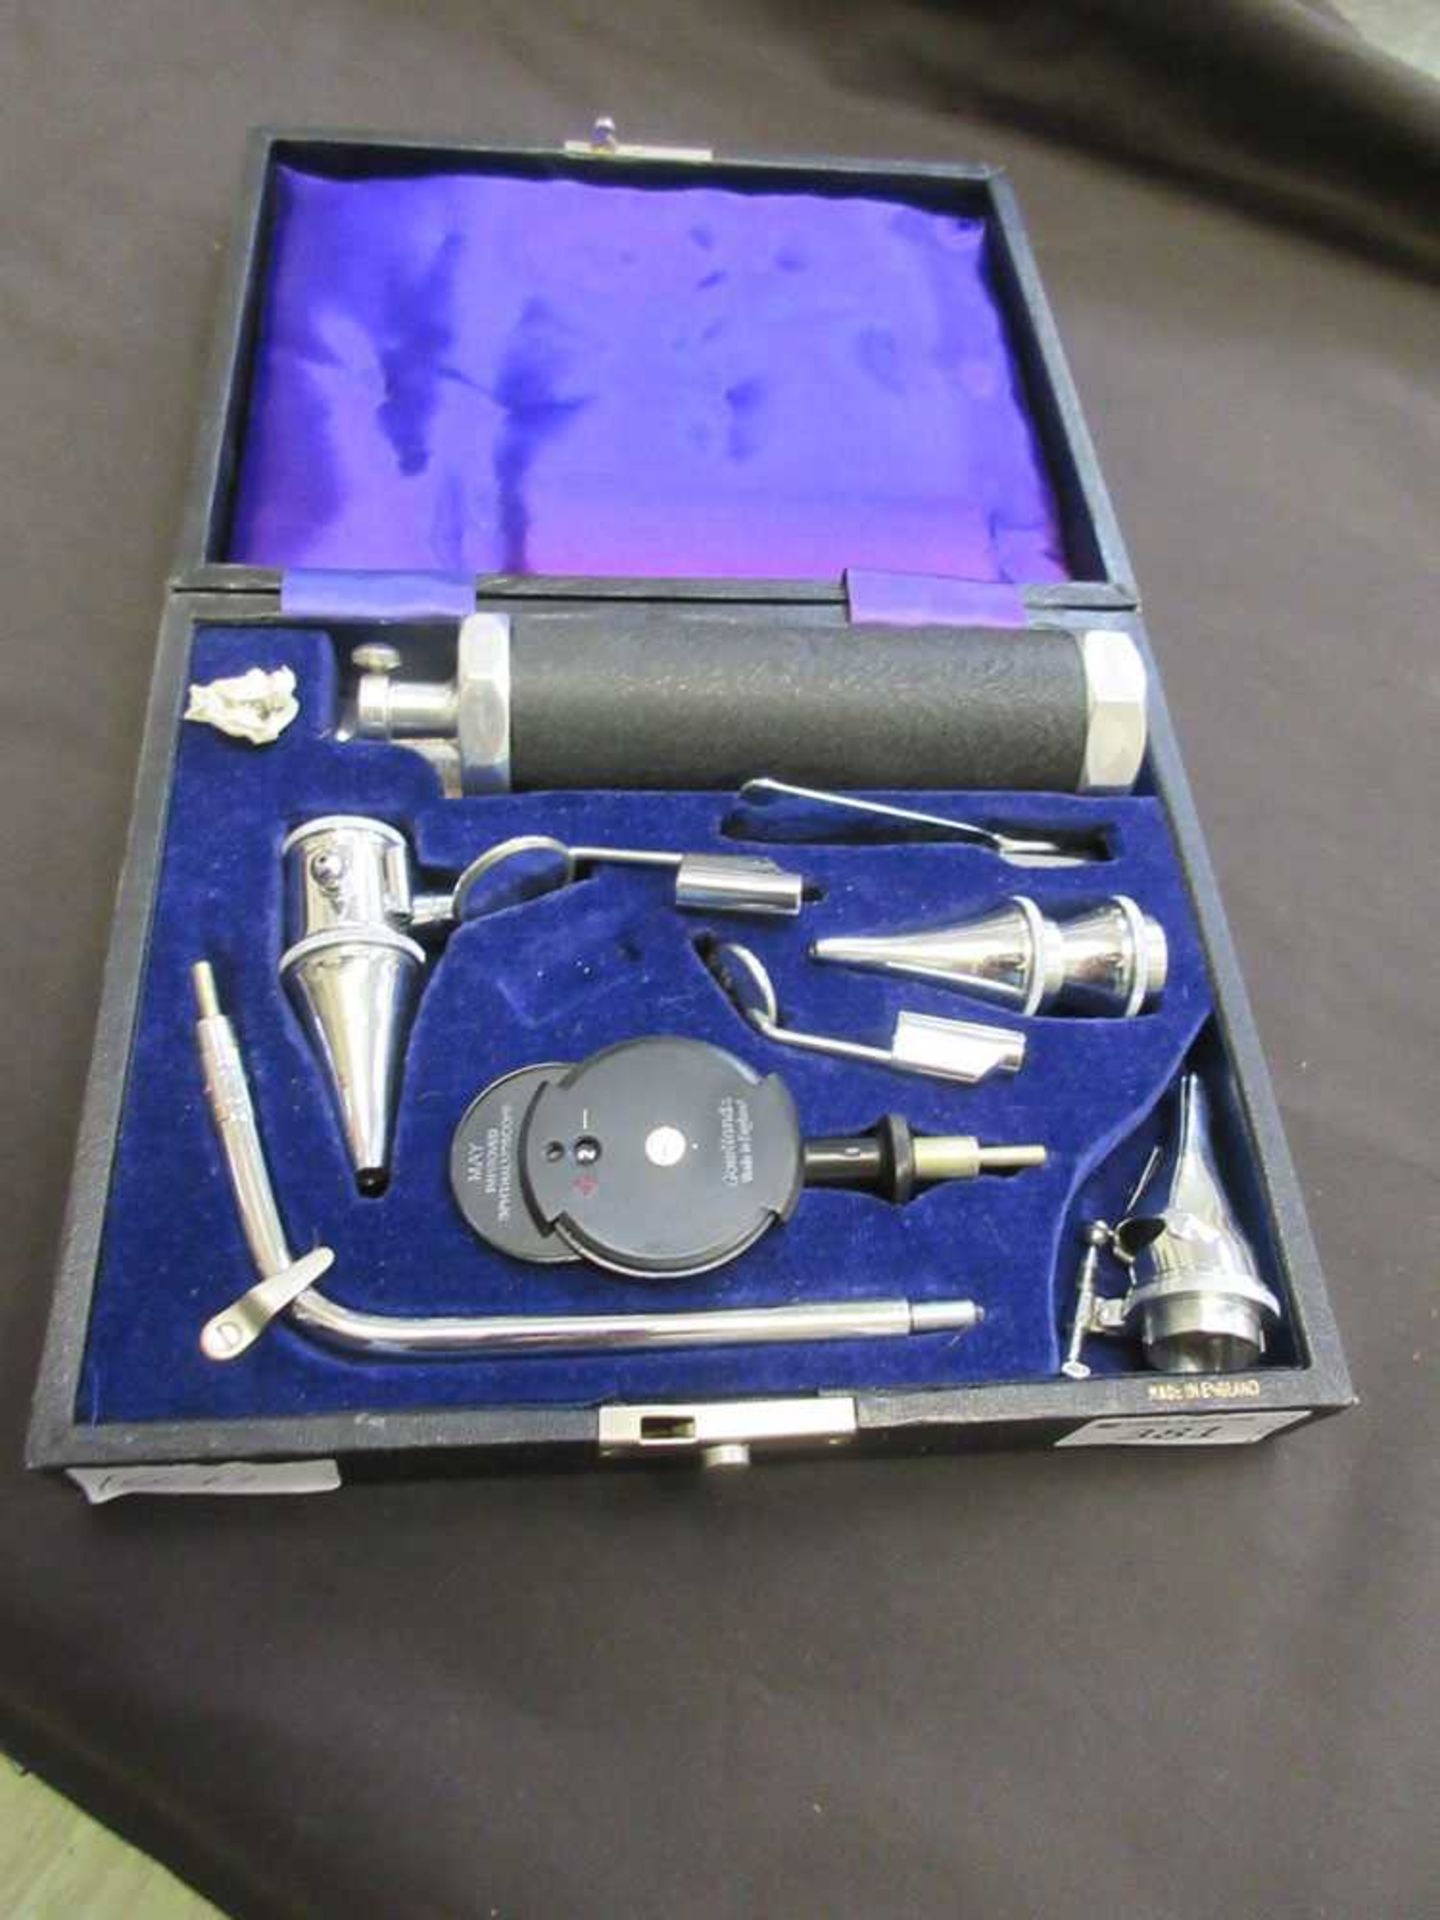 A boxed set of medical equipment